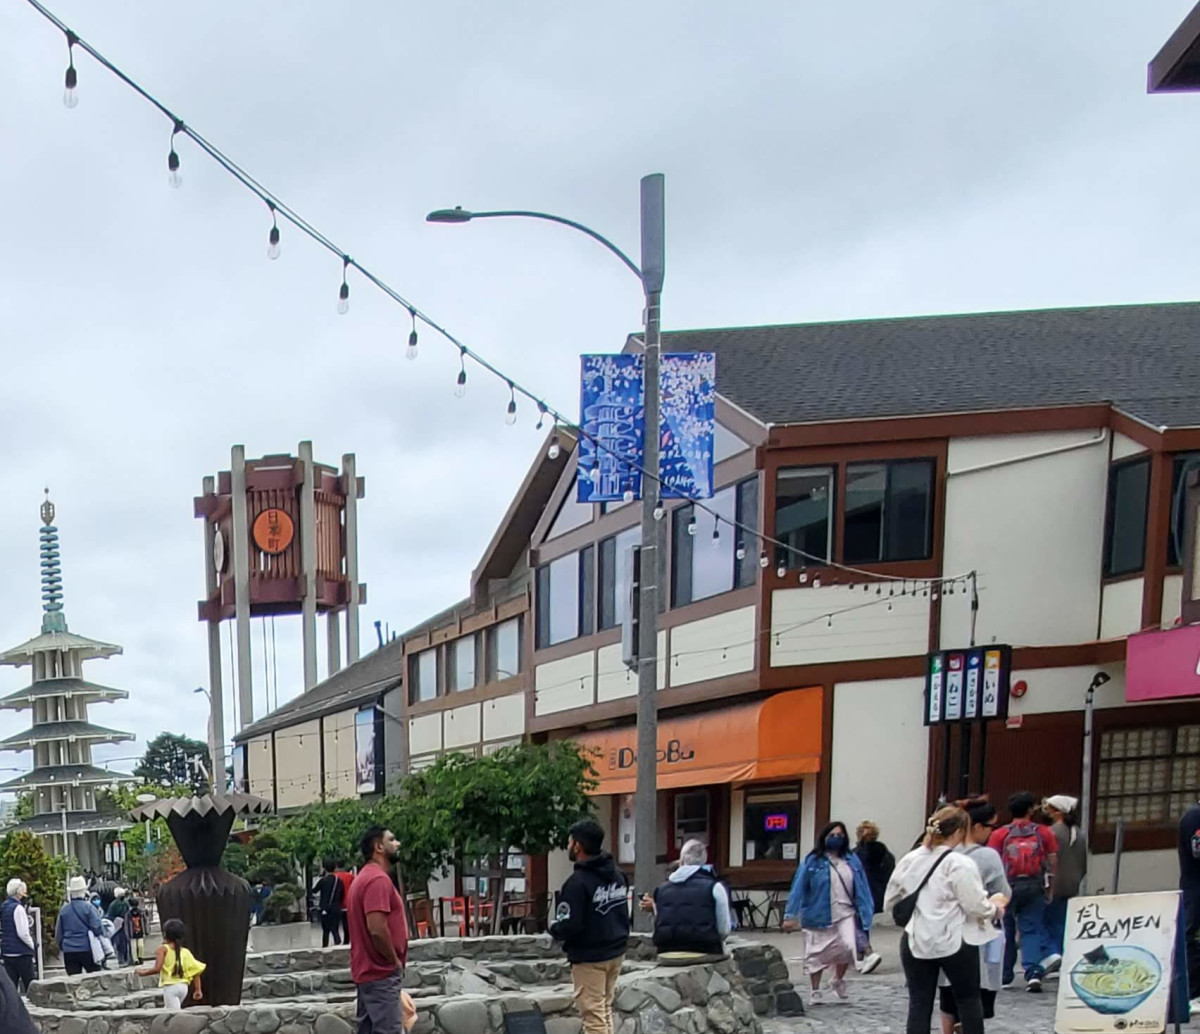 There are several restaurants within walking distance of Hotel Kabuki